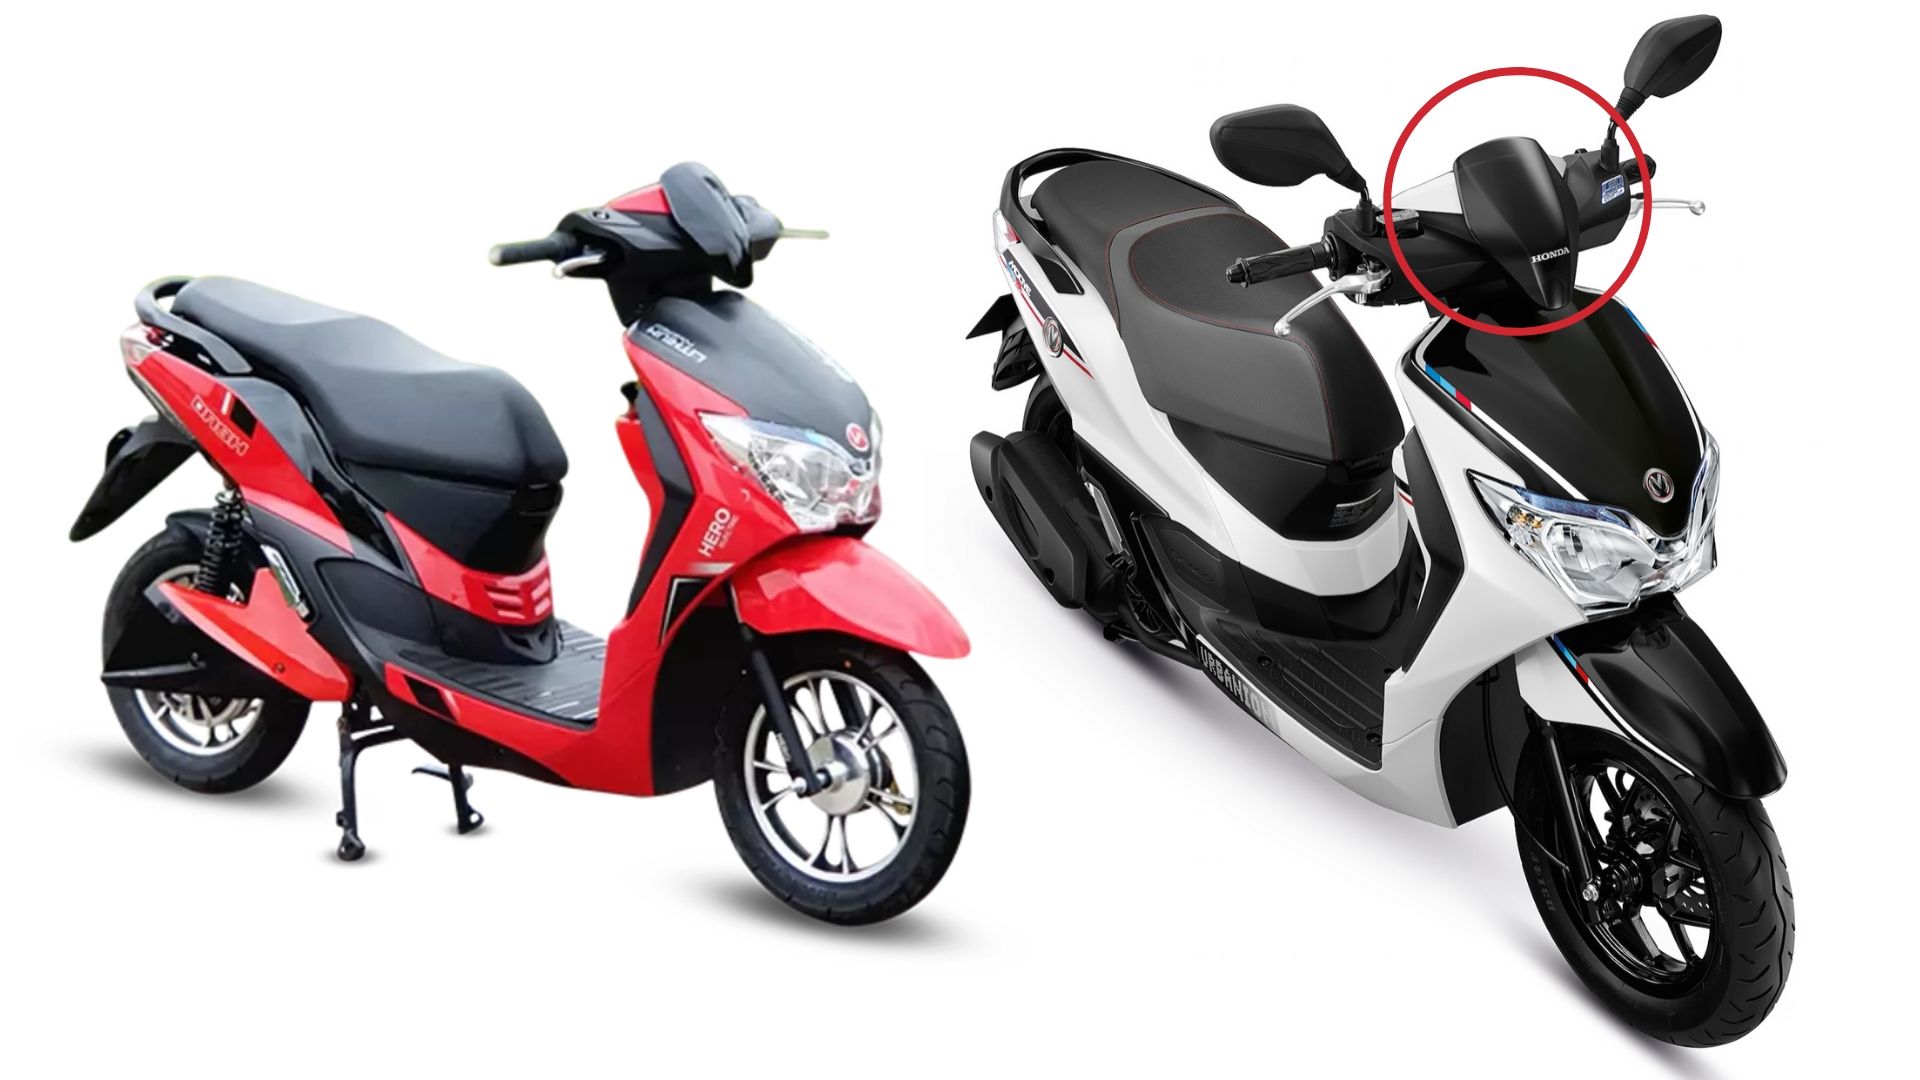 Best Mileage Electric Motorcycles in India